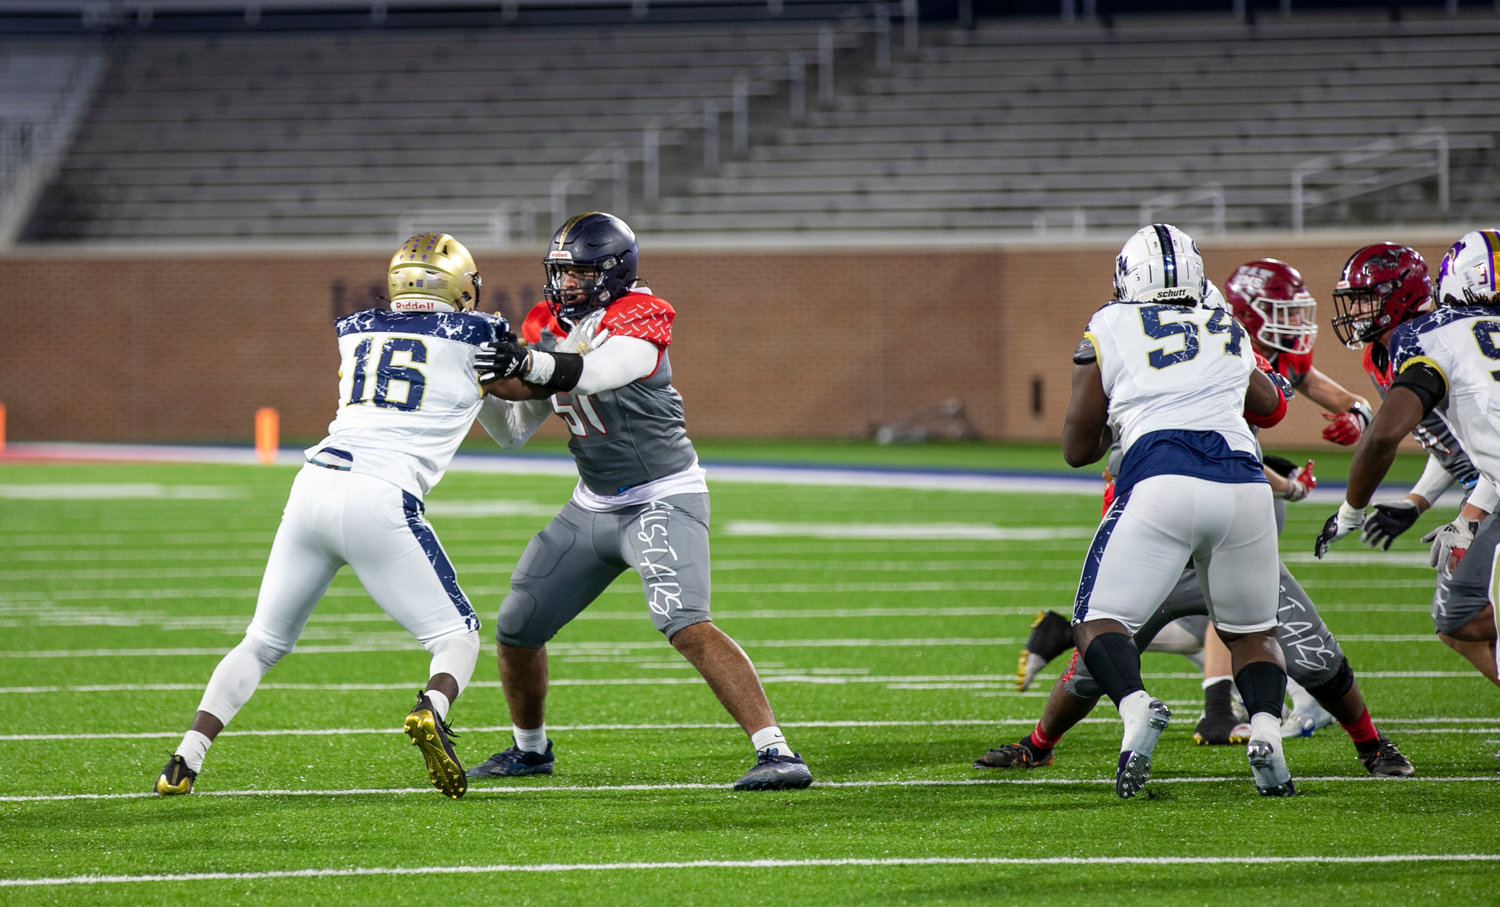 Foley senior Cameron Schultz engages with a North All-Star defensive lineman on a pass play during the AHSAA all-star football game on Abraham A. Mitchell Field at Hancock Whitney Stadium in Mobile Friday, Dec. 16.